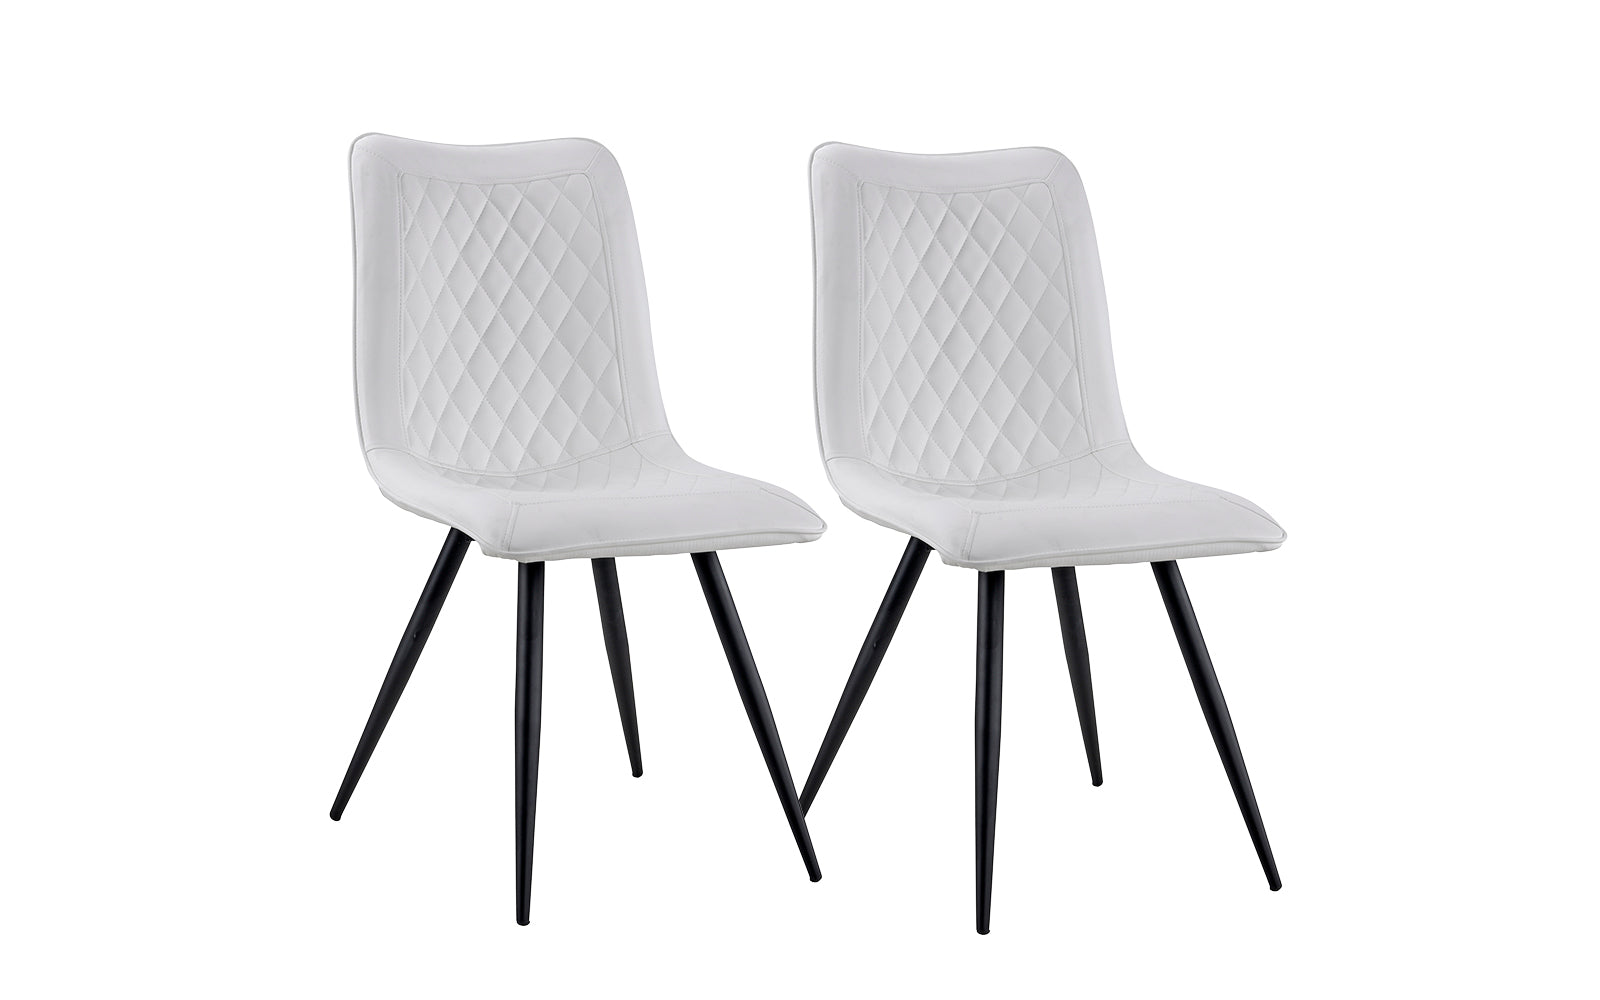 Cora Set of 2 Elegant Faux Leather Dining Chairs